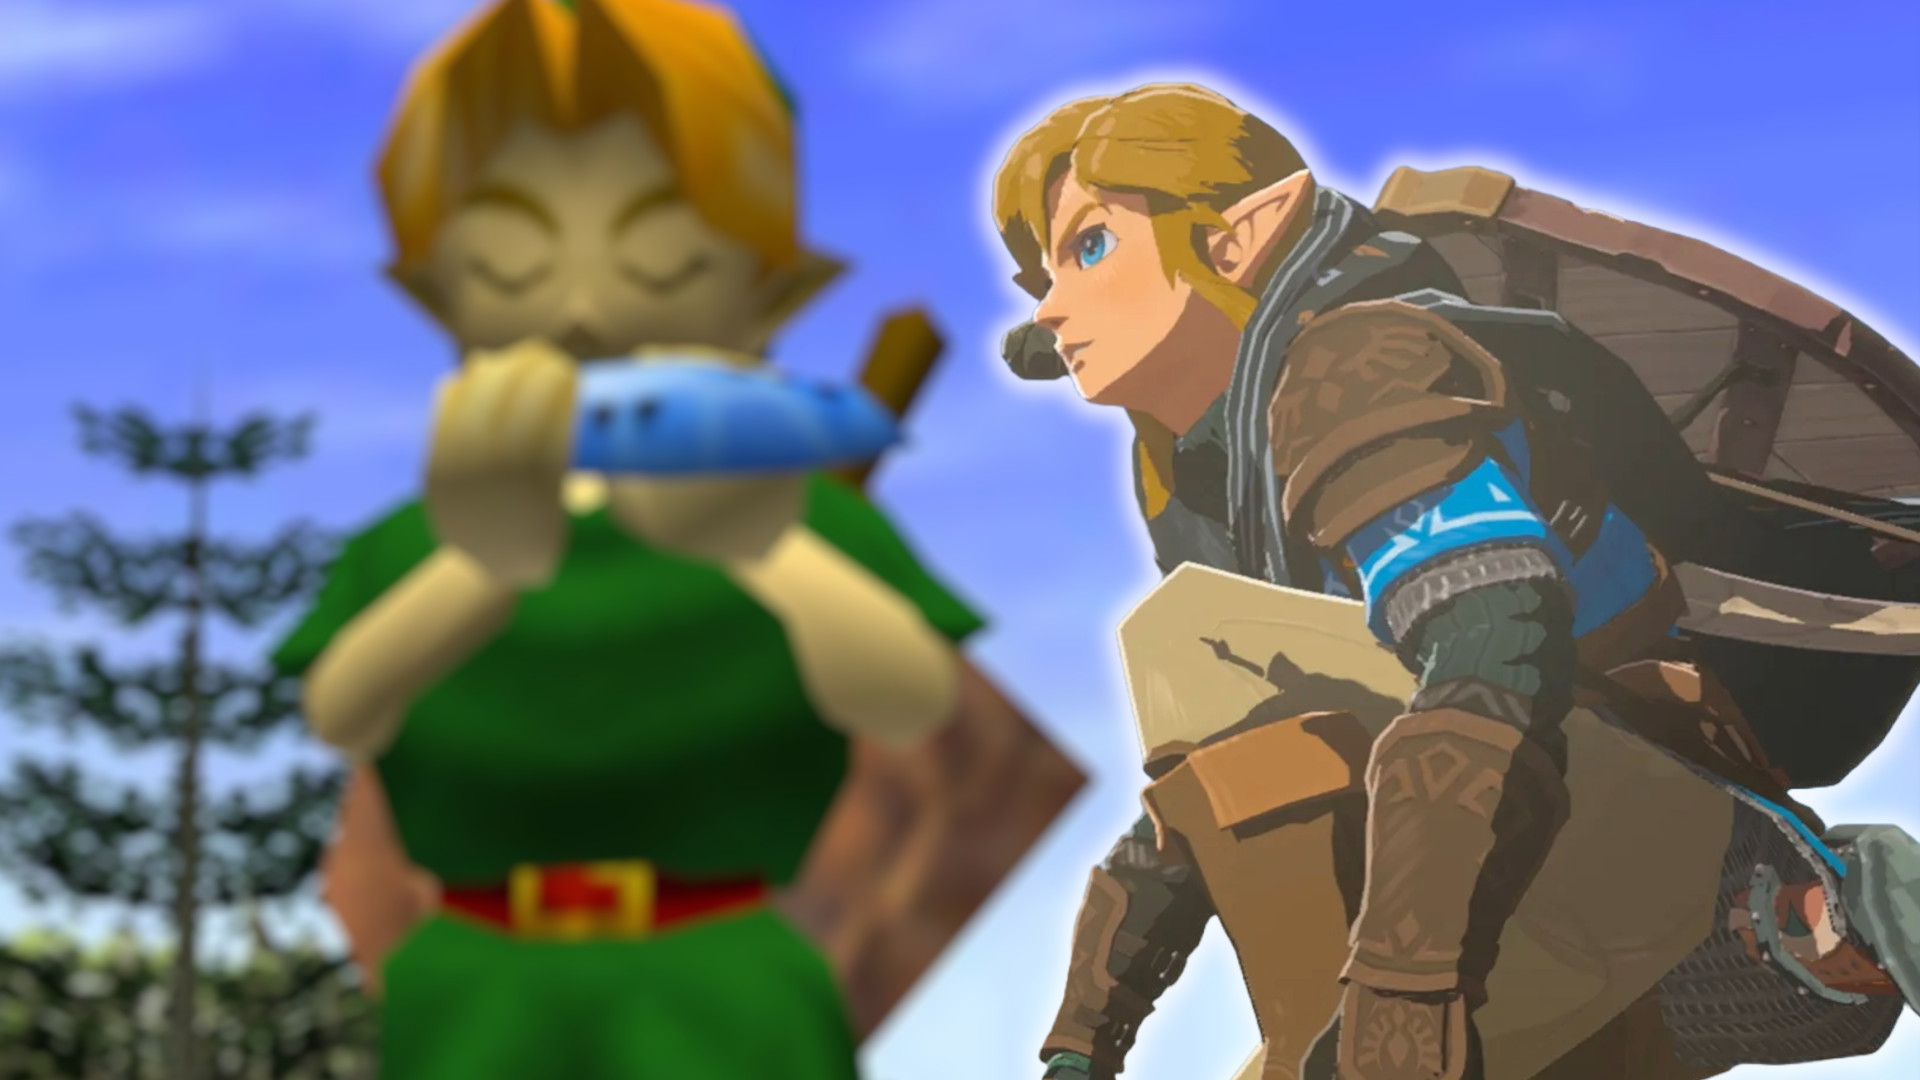 New Zelda Game news, release date estimate, and more